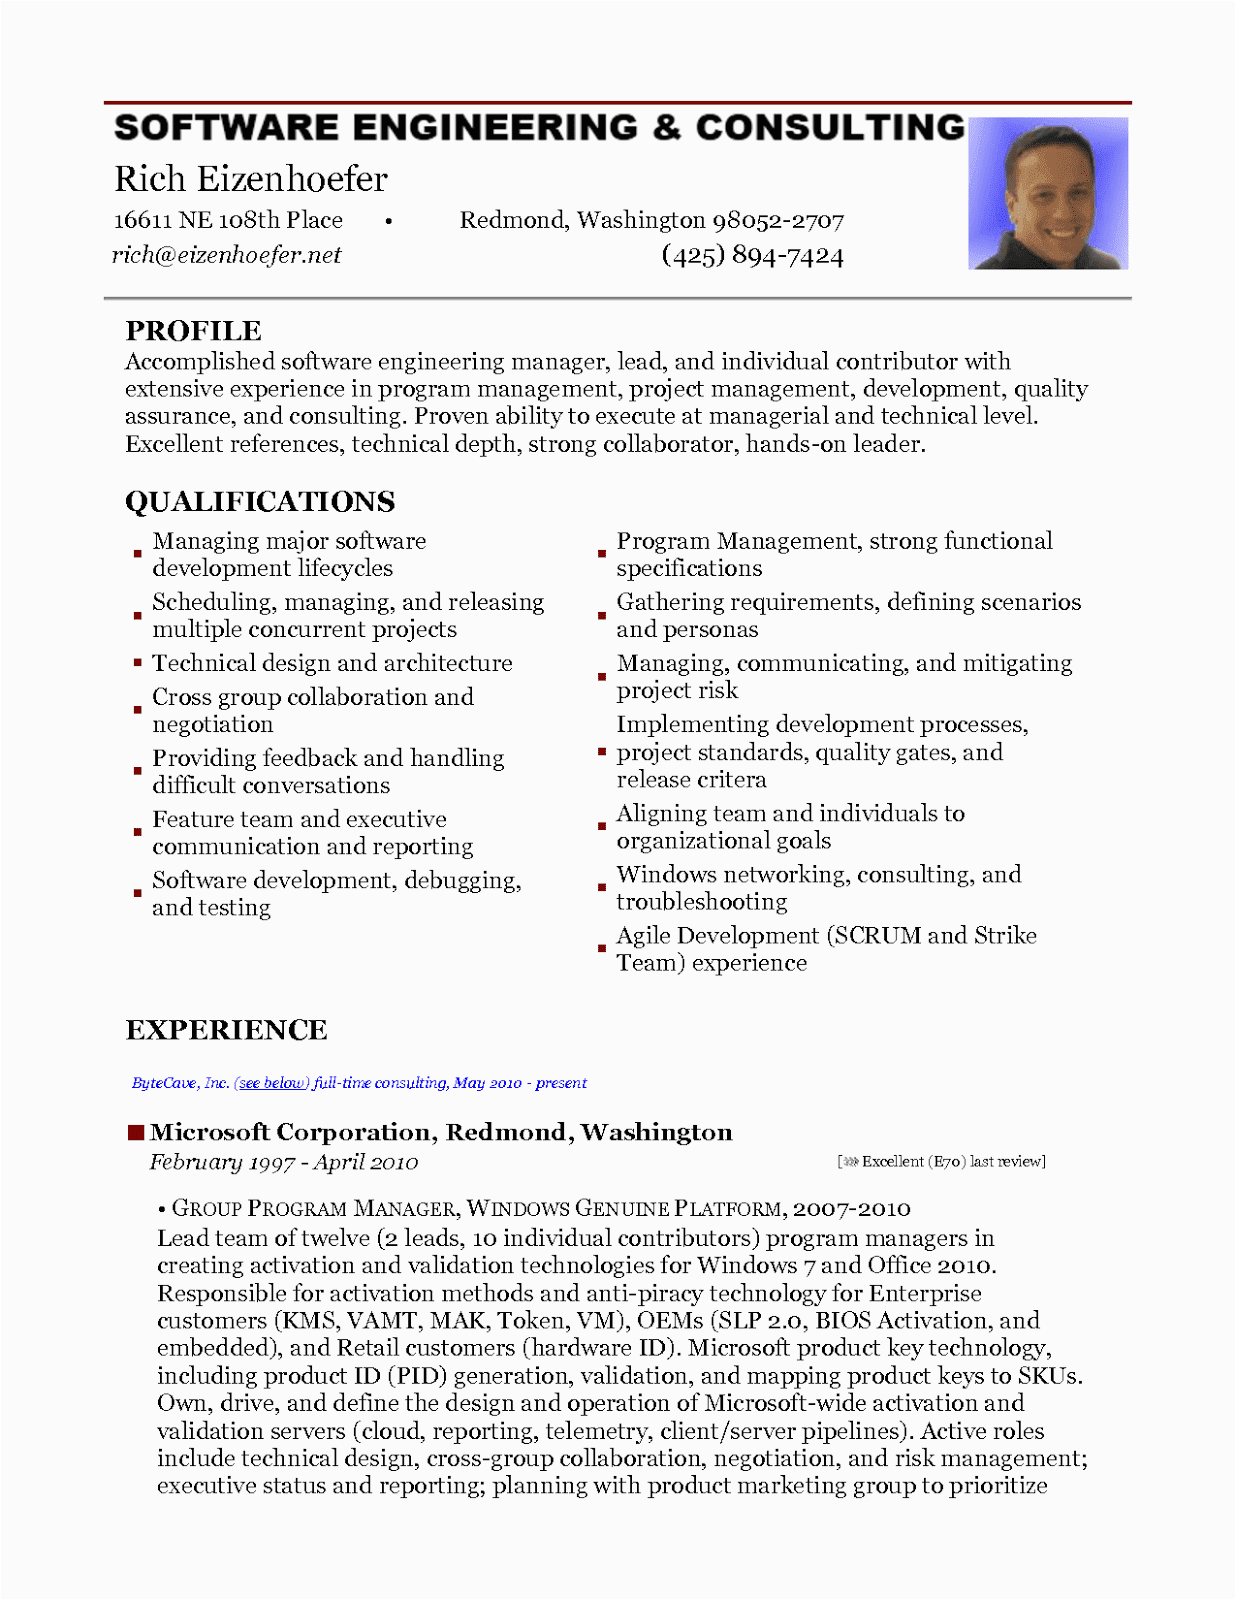 Sample Resume for software Engineer with 2 Years Experience Pdf 2 Years Experience Resume Scribd India